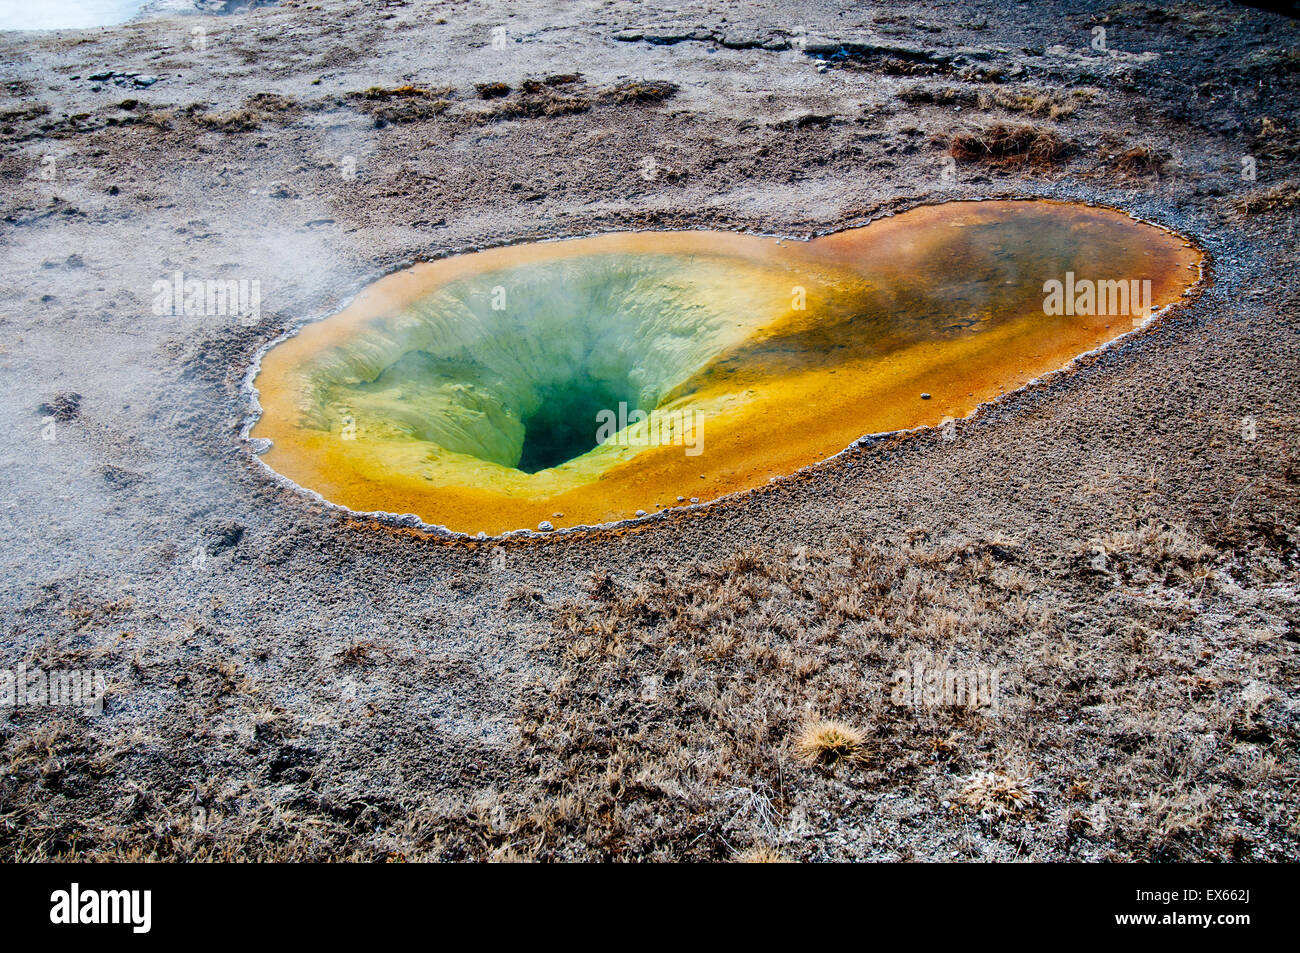 Belgian Pool in the Upper Geyser Basin in Yellowstone National Park WY Stock Photo